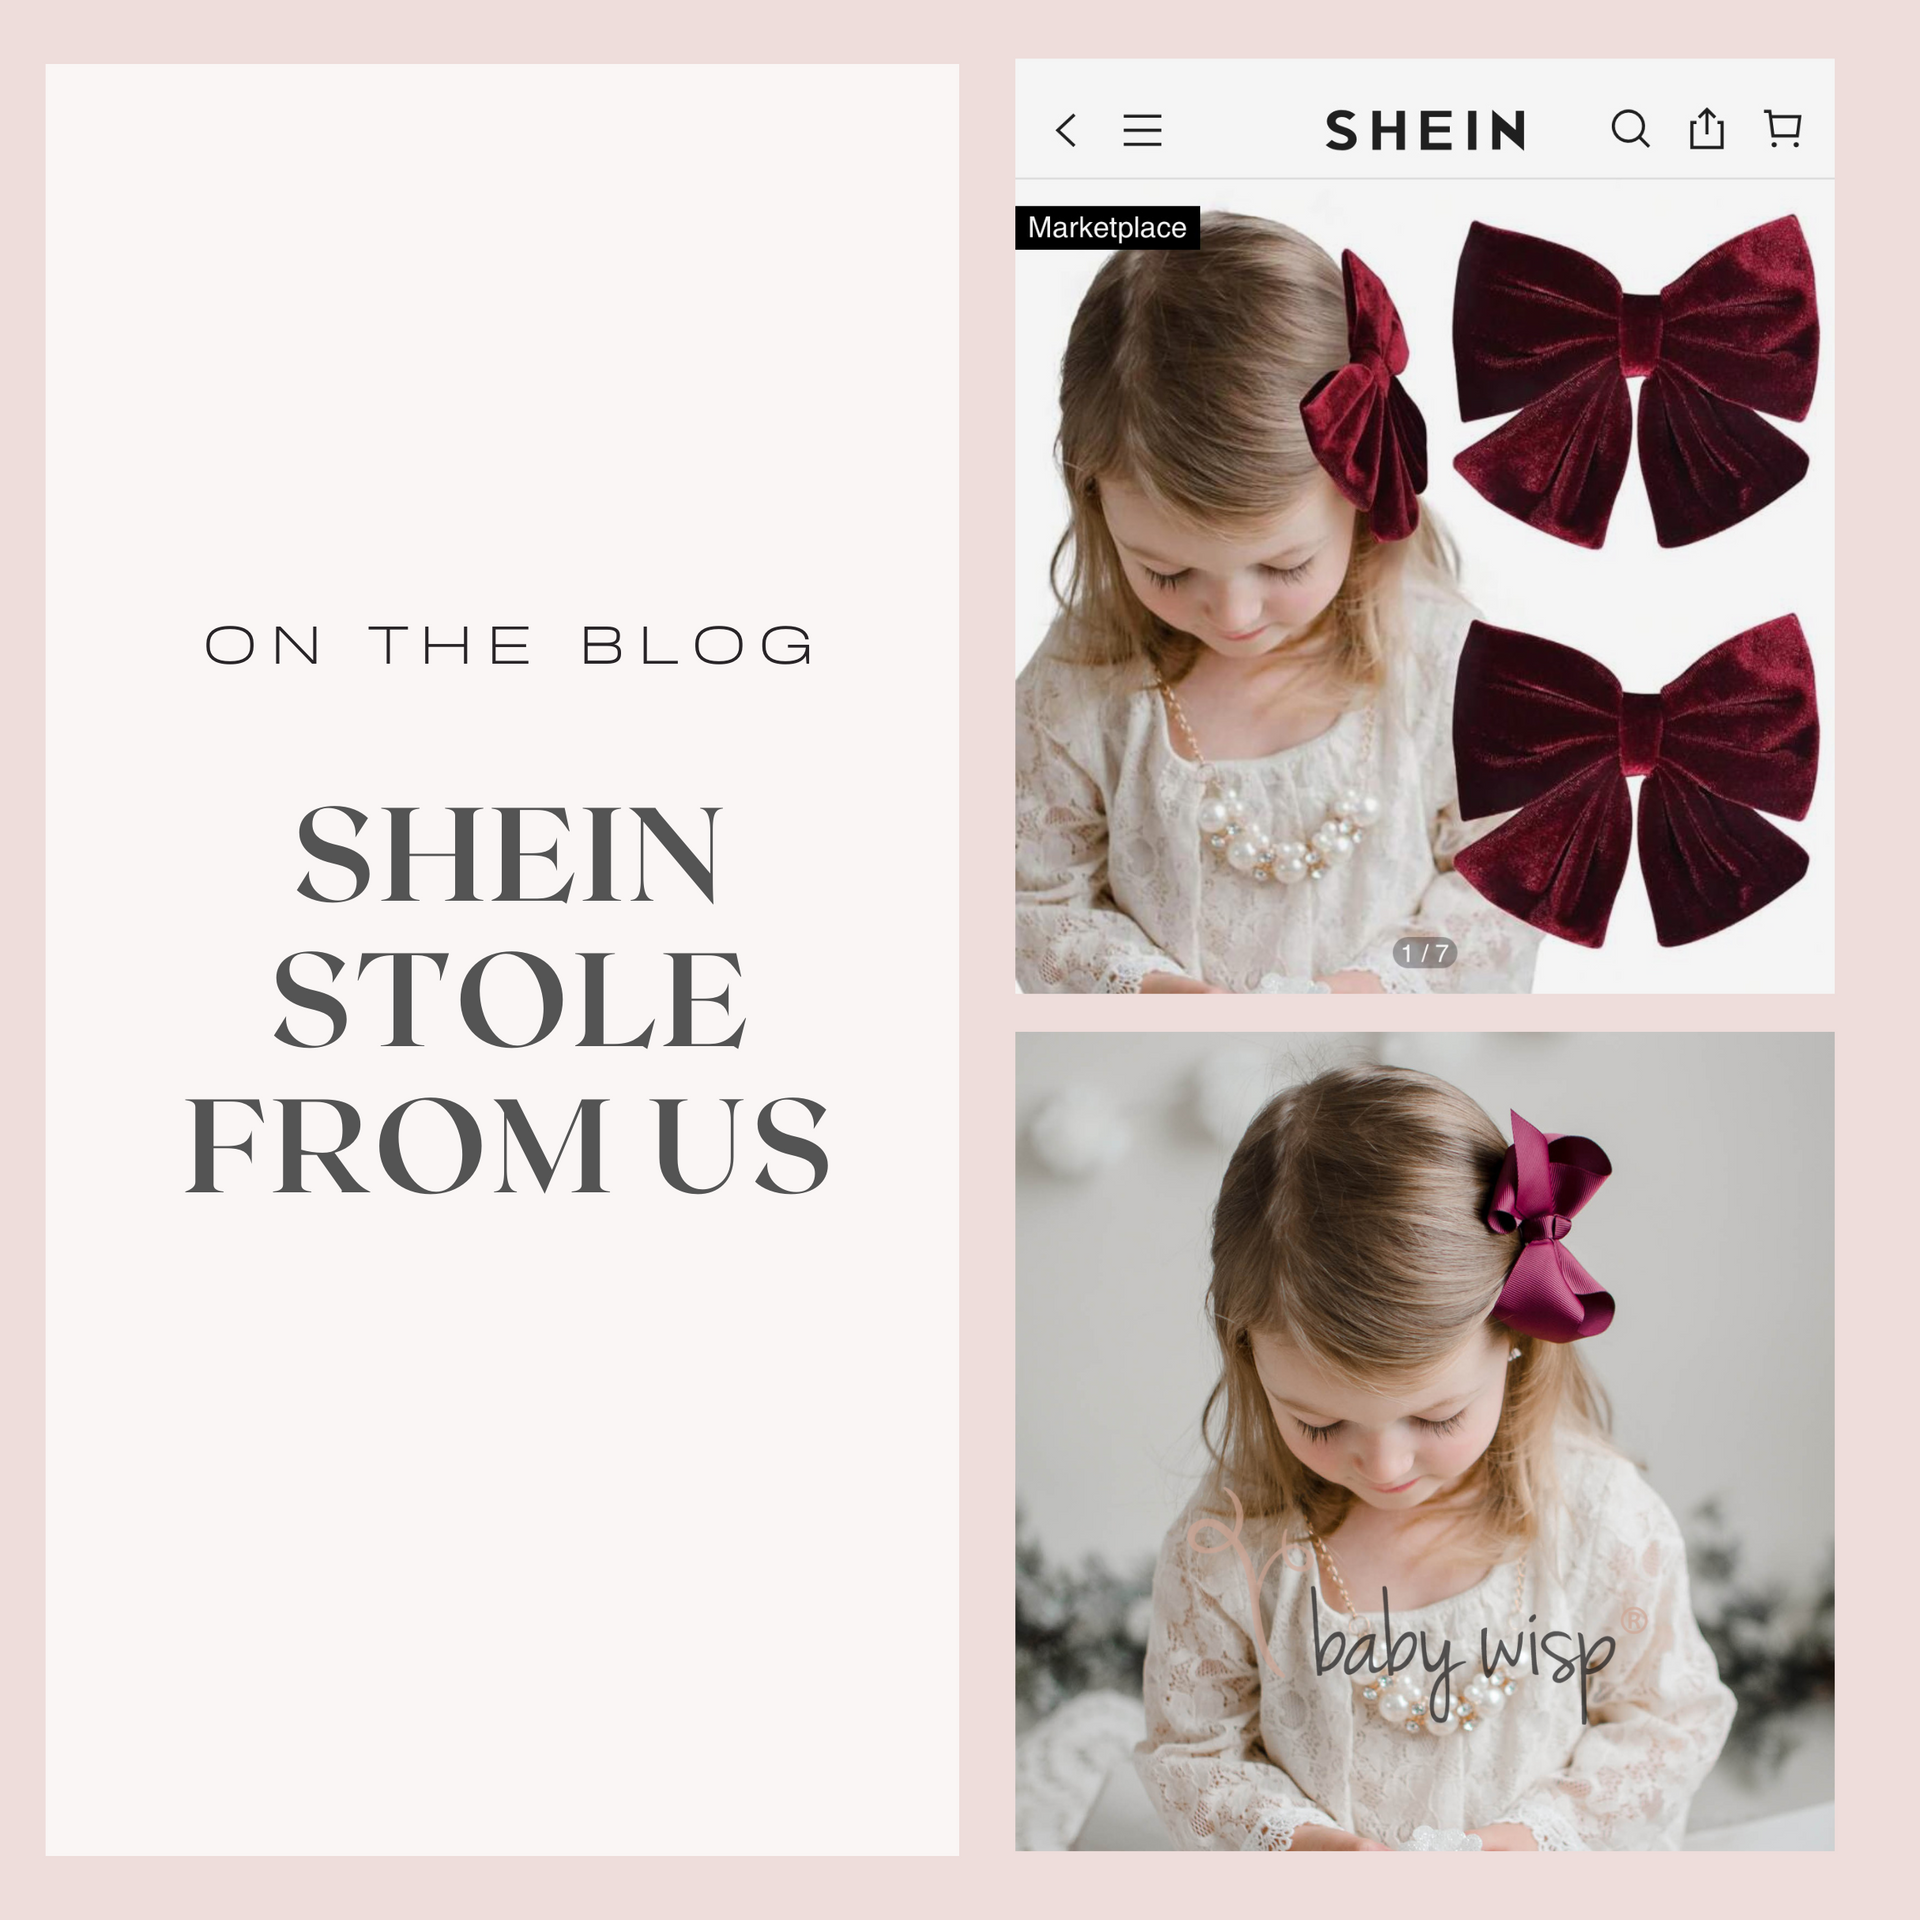 SHEIN STEALING PHOTOS FROM A SMALL BUSINESS